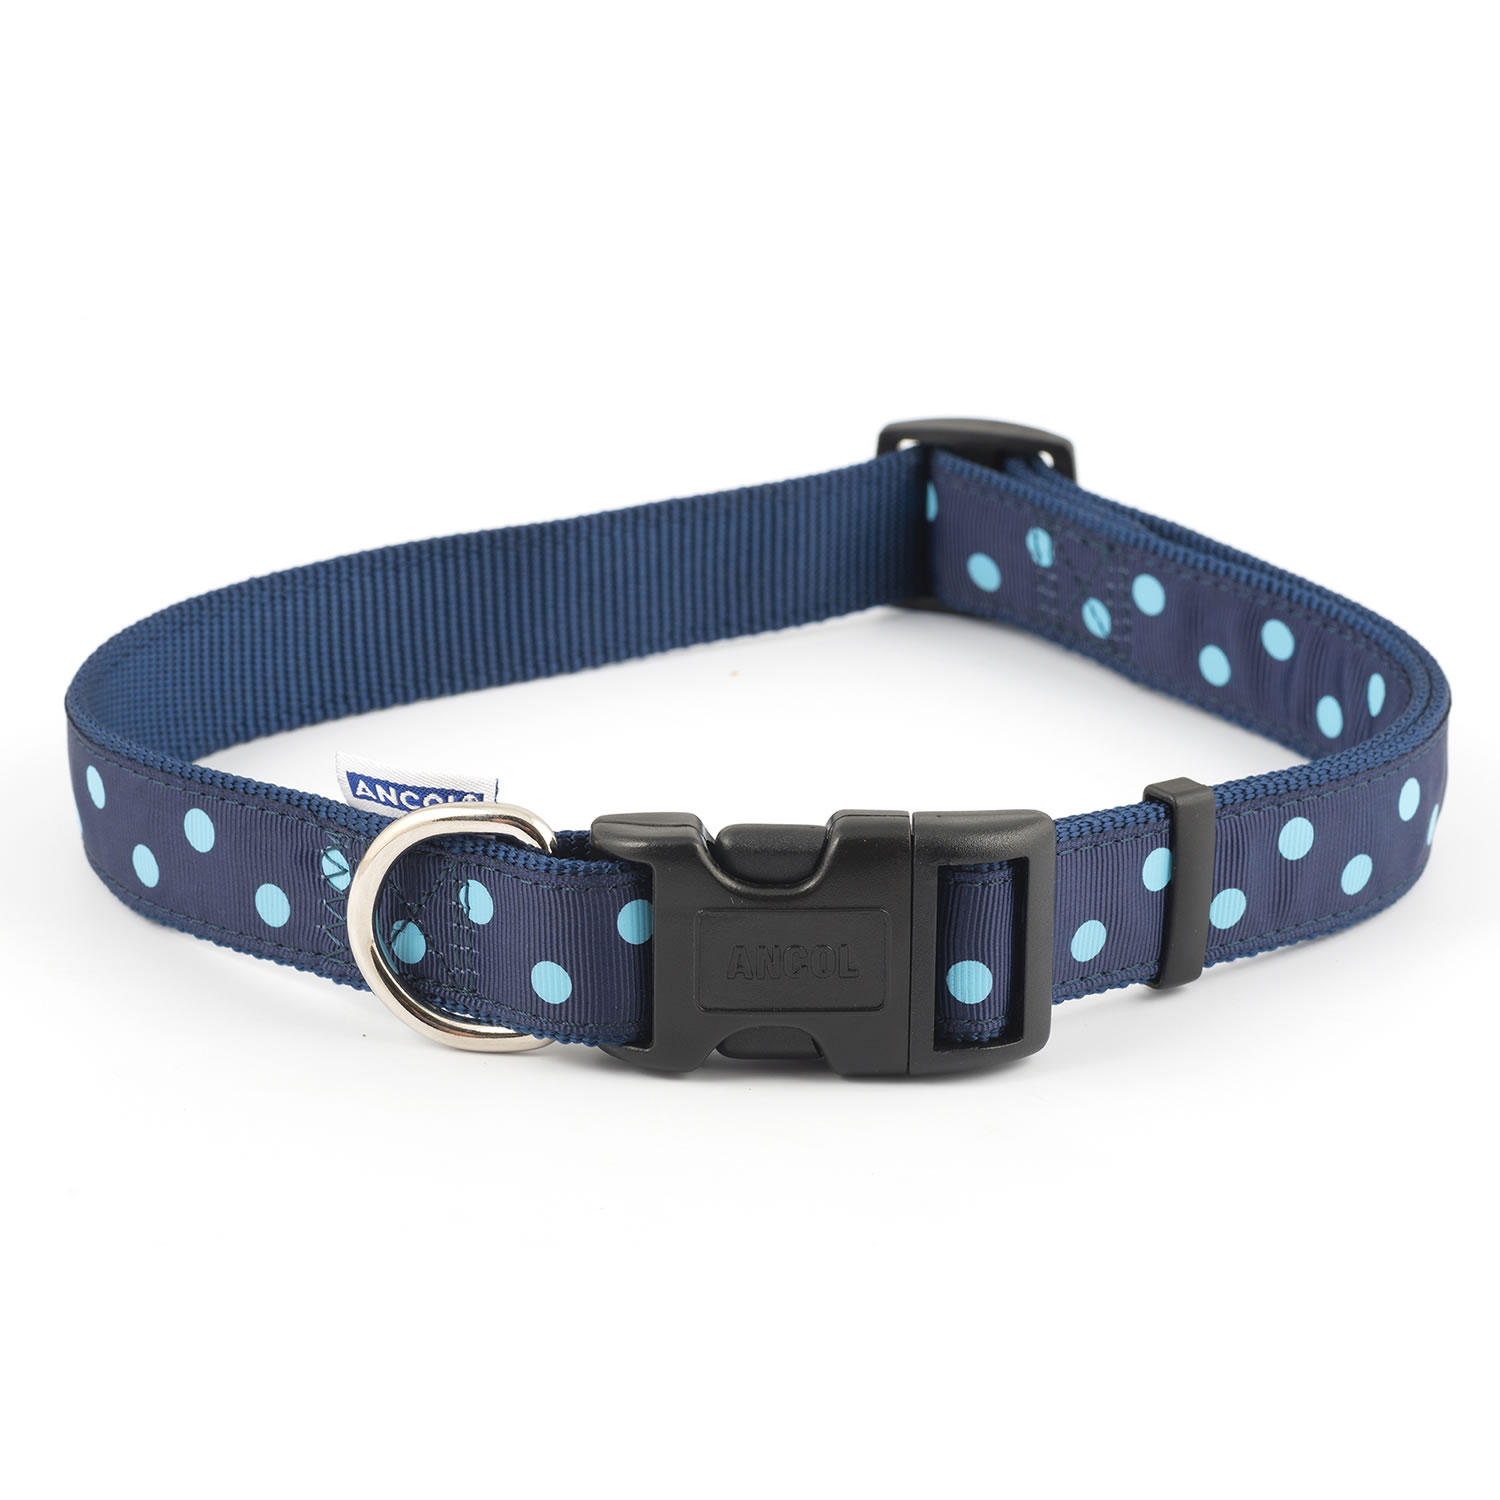 ANCOL PATTERNED COLLECTION COLLAR NAVY/POLKA DOT